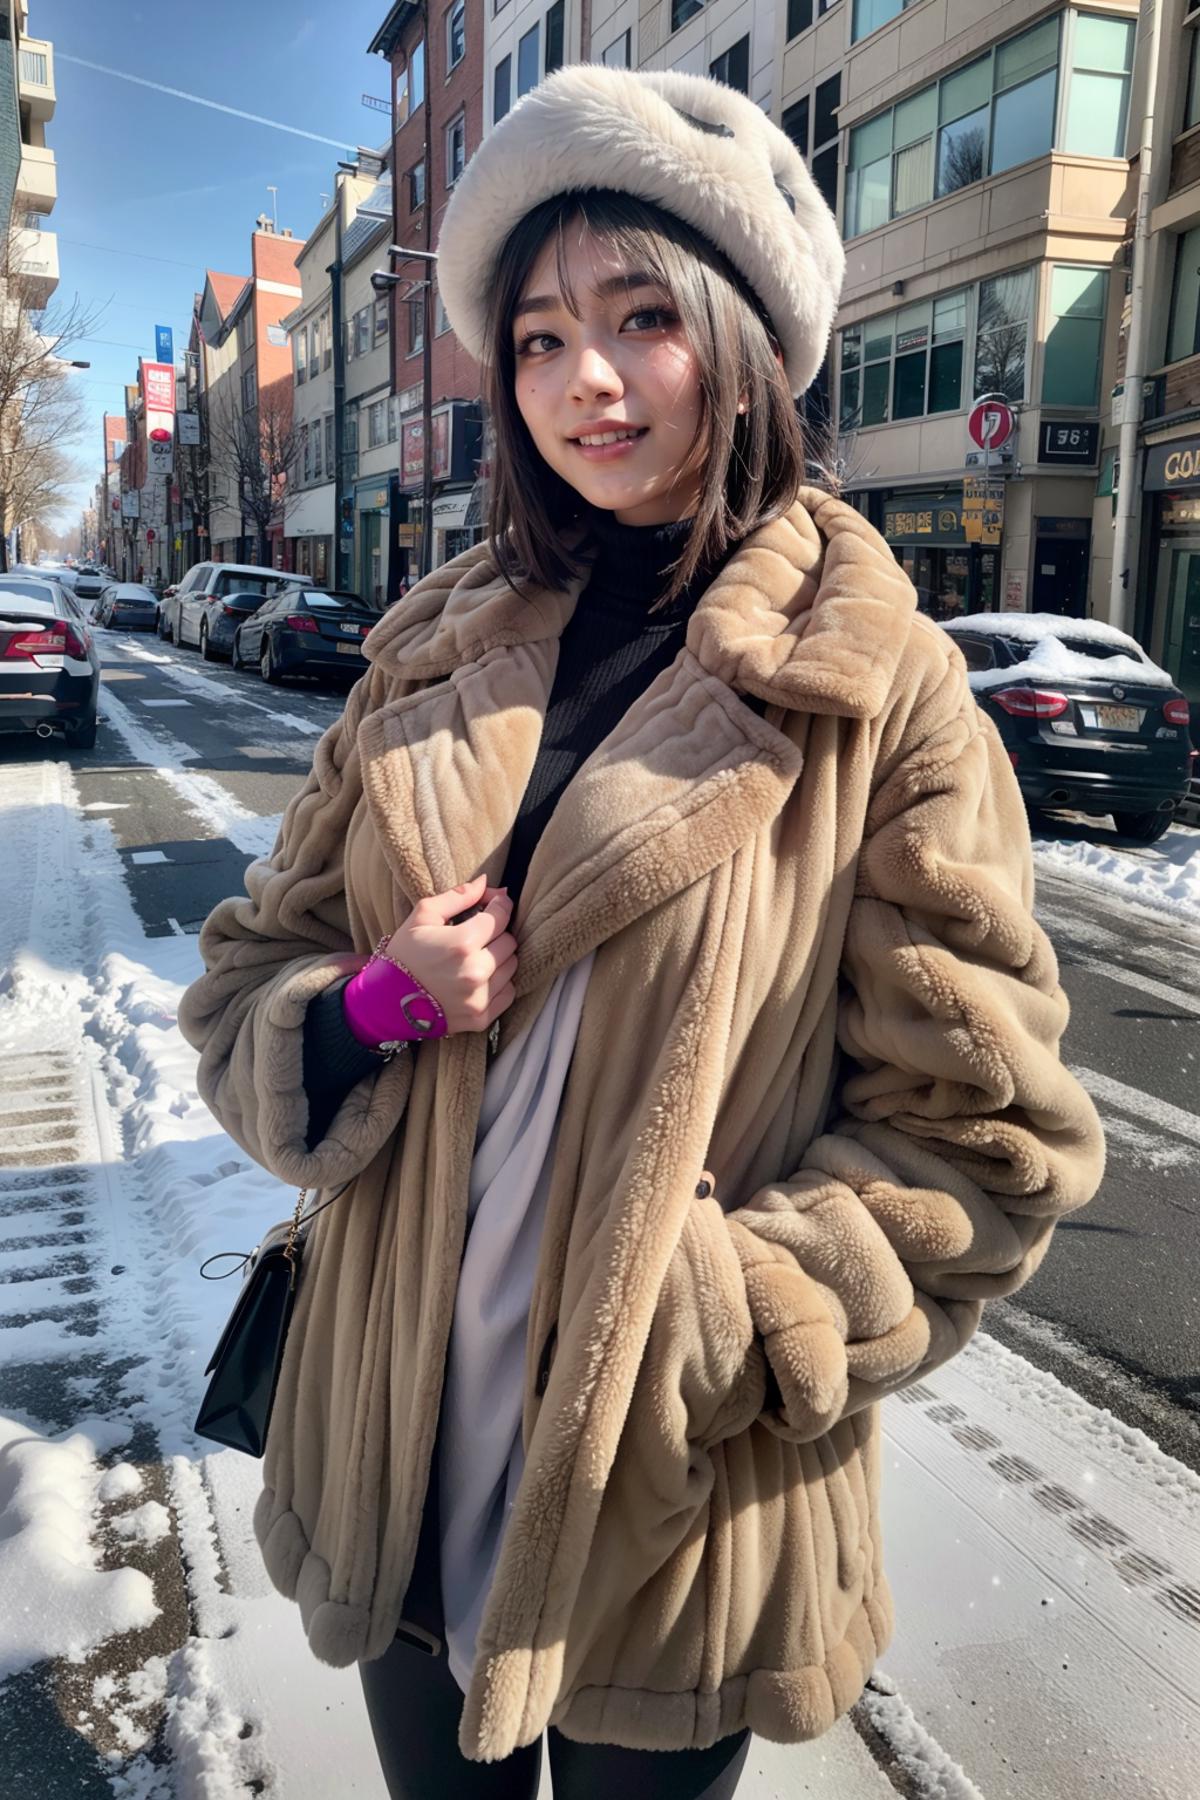 Vintage Mink Coat - Requested image by feetie